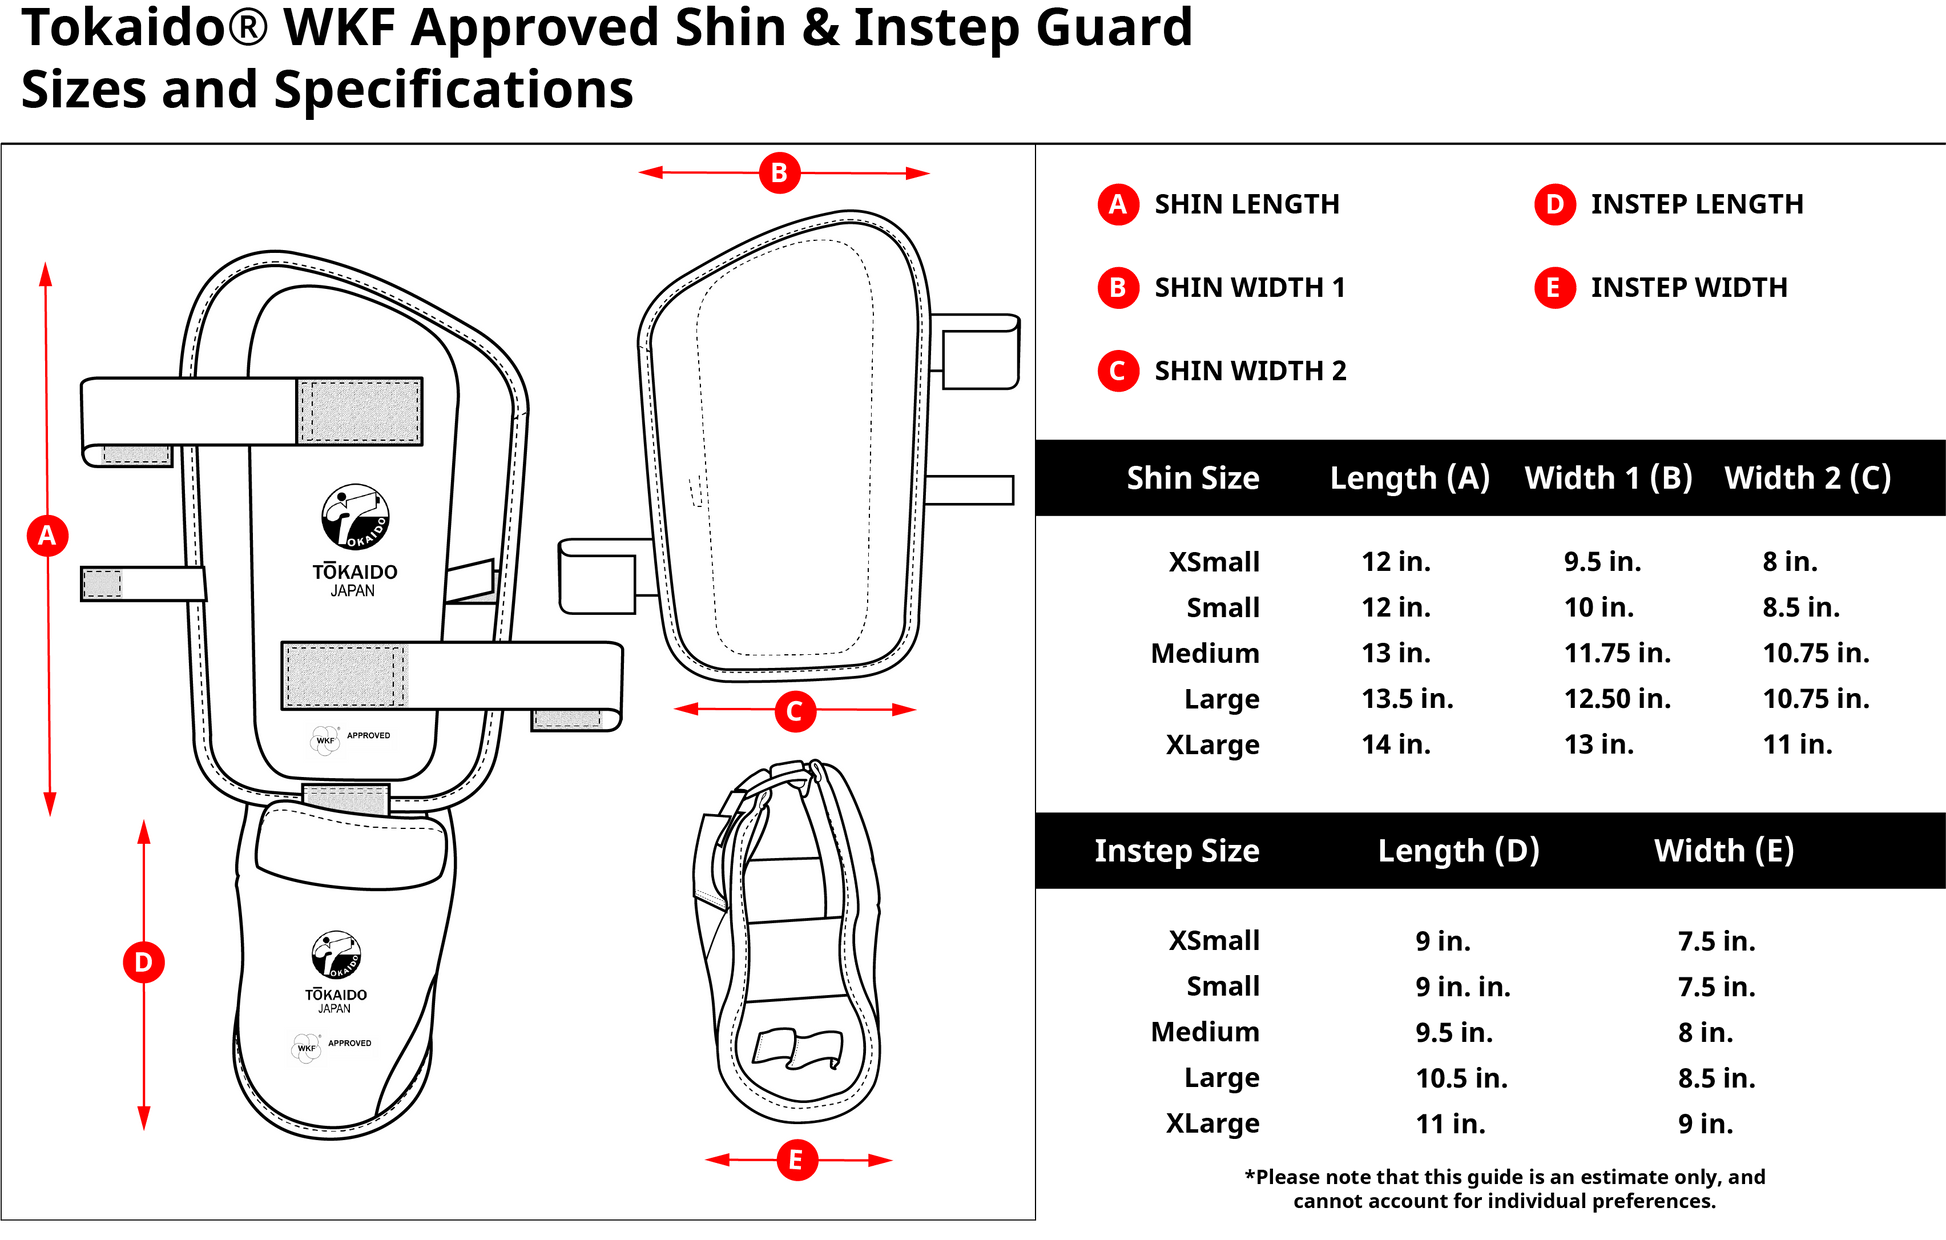 Eclipse Martial Art Supplies sporting goods Tokaido WKF approved shin and Instep sparring gear